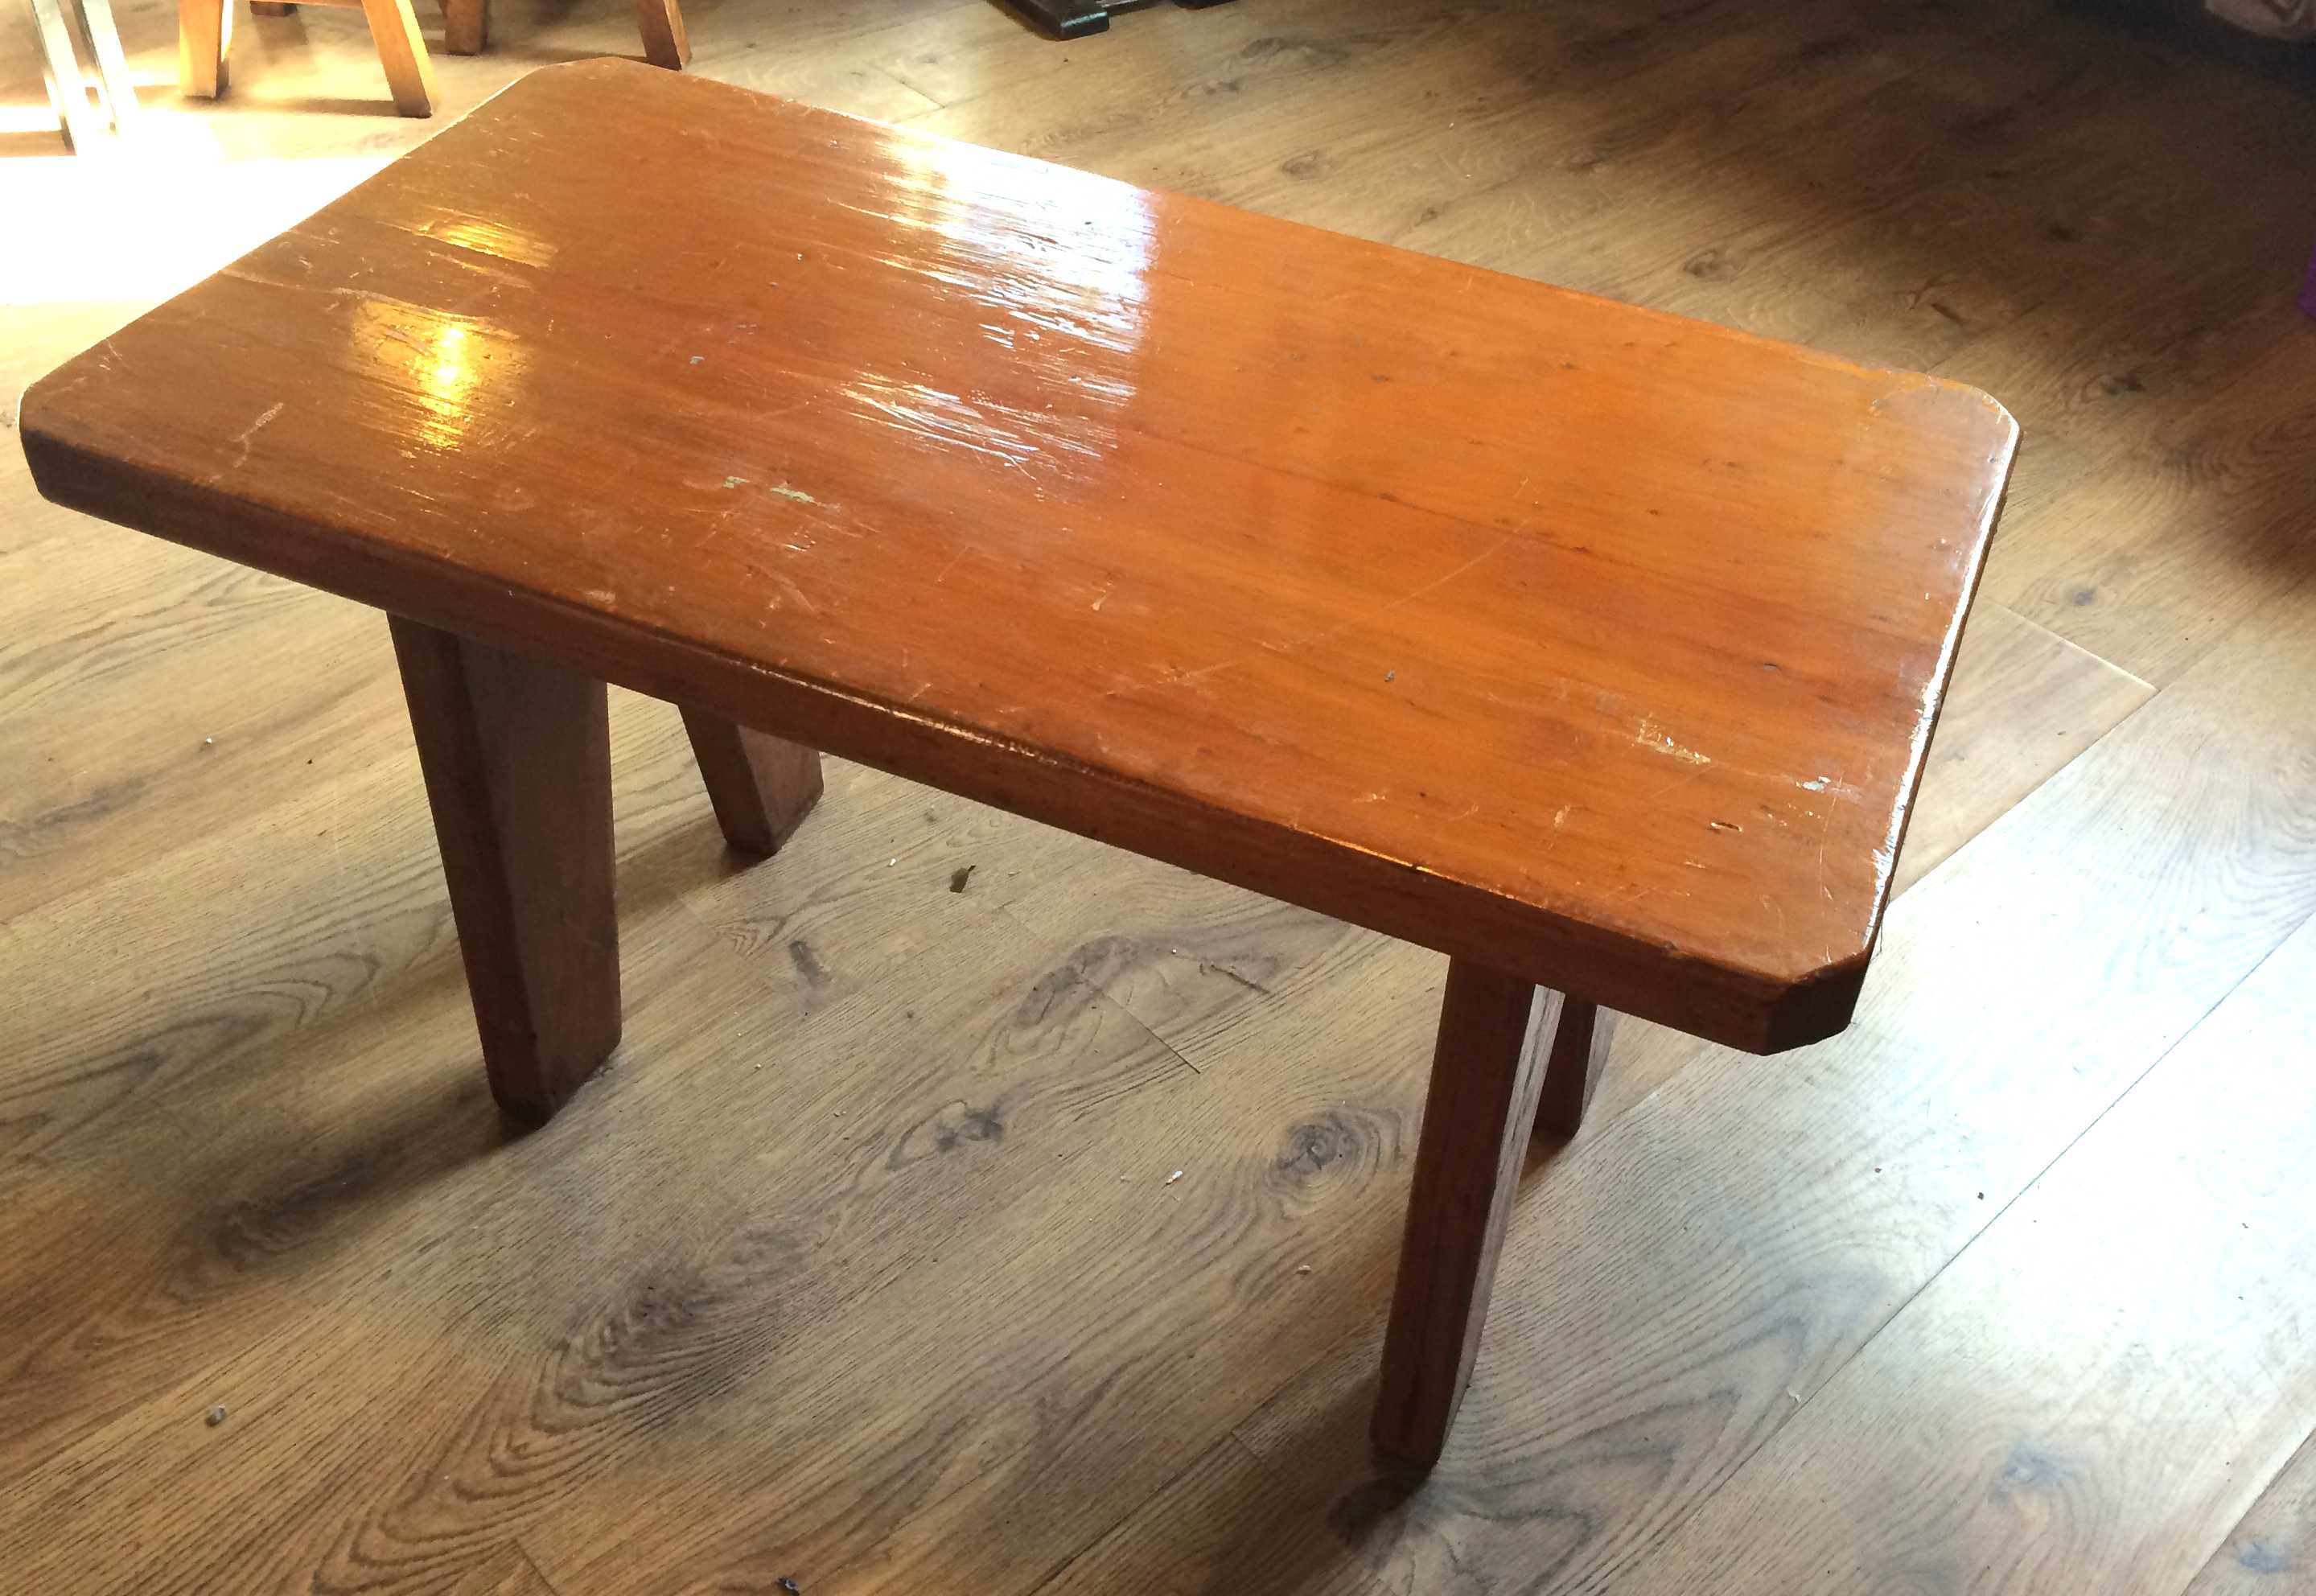 Coffee table with inverted V legs and signed underneath ‘Spenlove’ see image 2